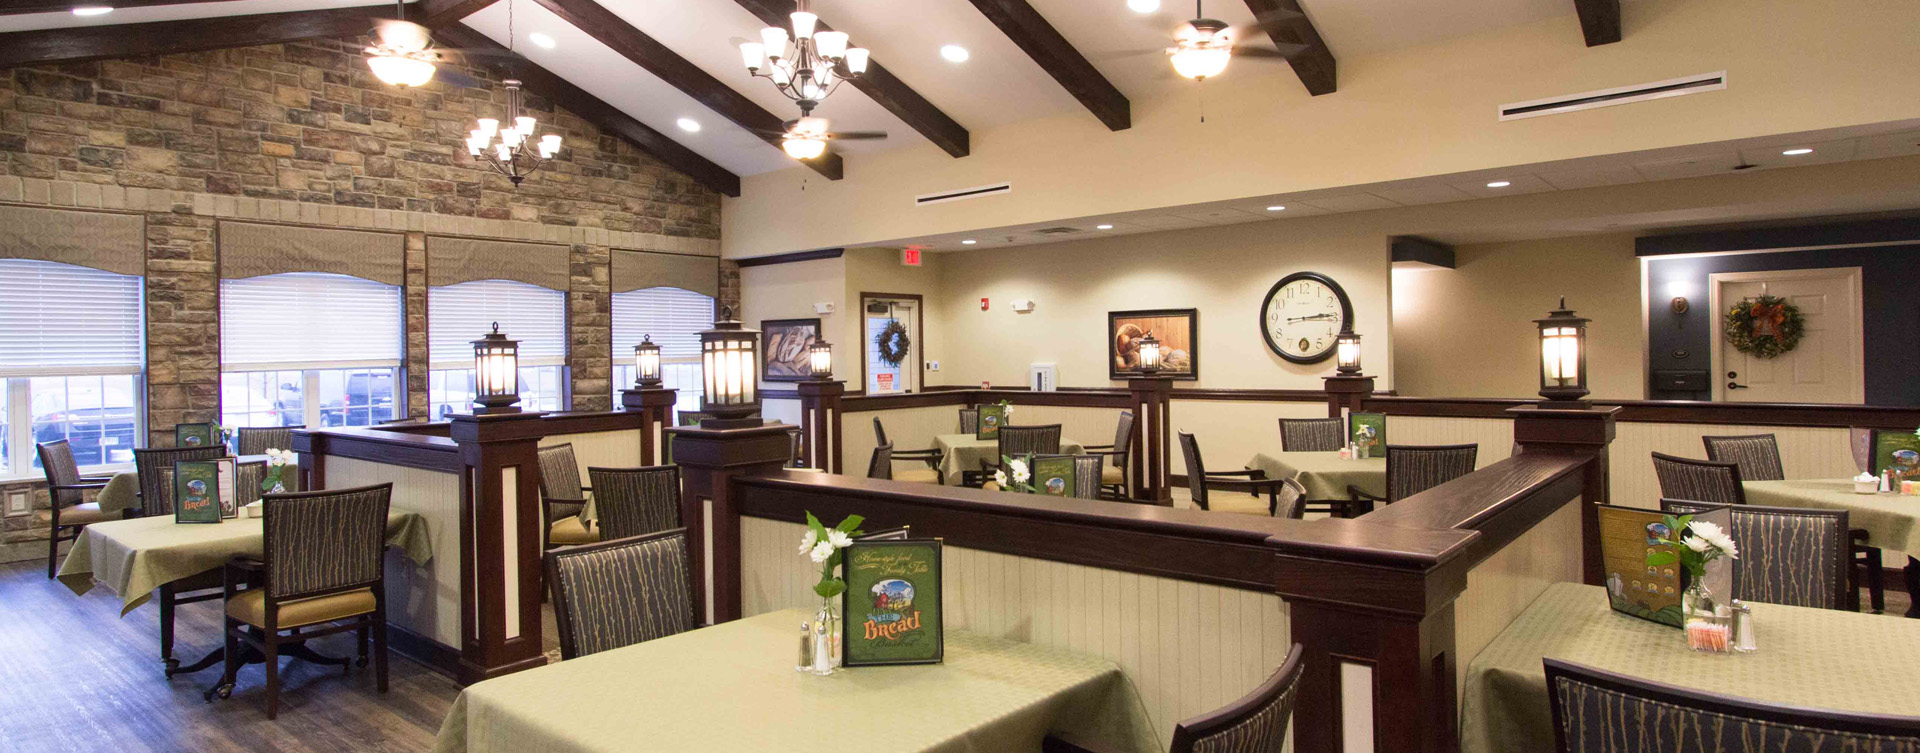 Enjoy homestyle food with made-from-scratch recipes in our dining room at Bickford of Gurnee